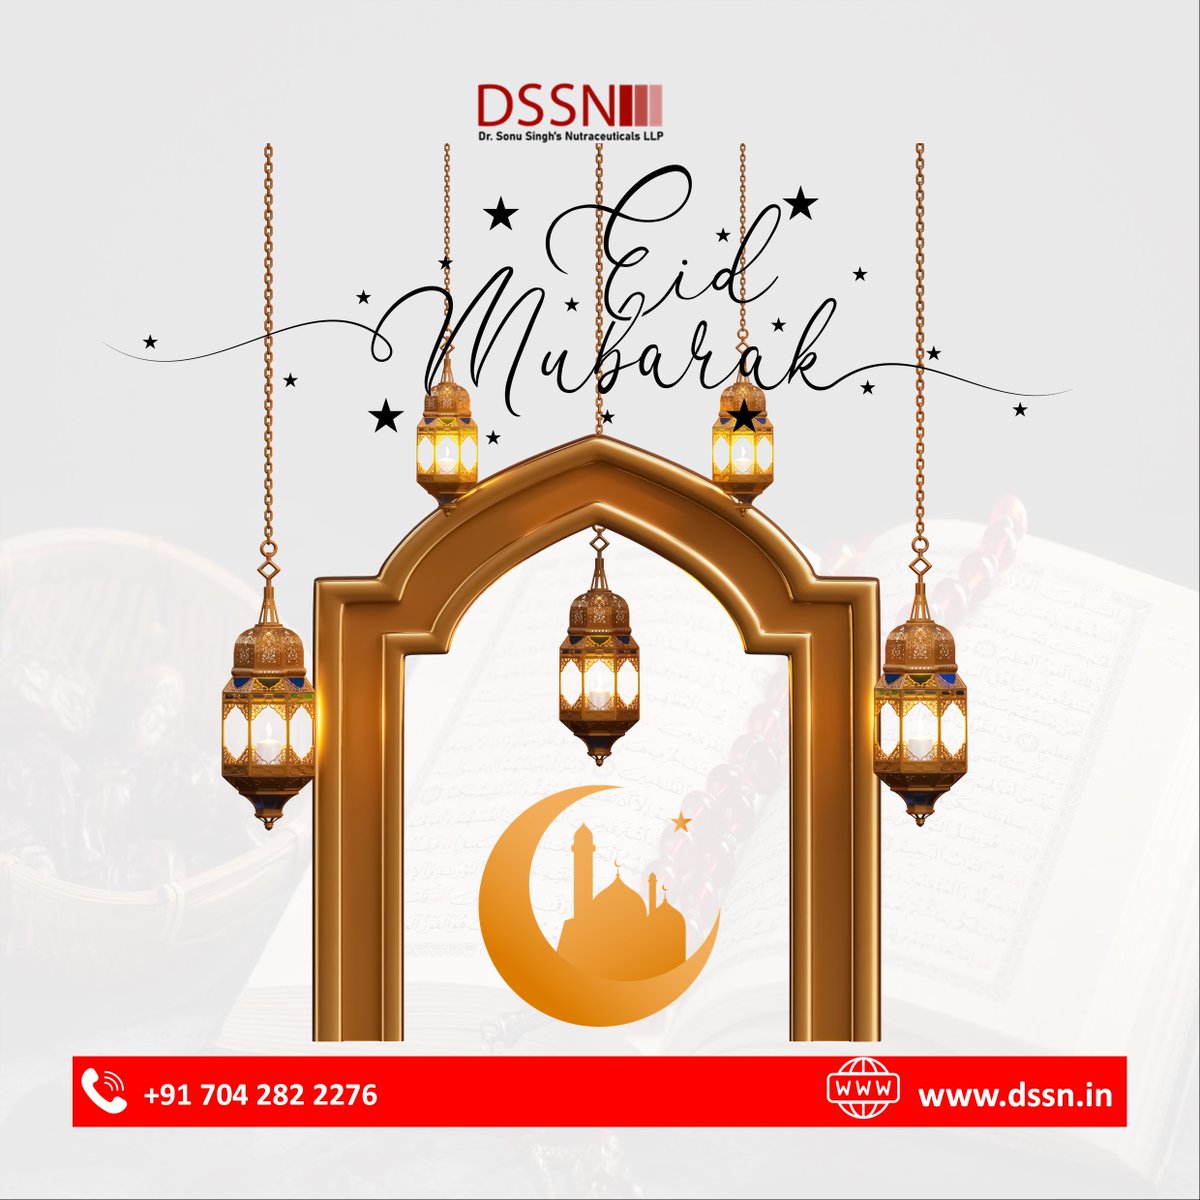 Wishing you and your loved ones a Very Happy Eid.
To know More 📷
📷: dssnsocial@gmail.com
📷.: 070428 22276
#krillbenefits #HealthySkinSecrets #eidmubarak #eidfestival #EidGlow #eidspecial #HealthySkinSecrets #RejuvenateYourSkin #antiaging #antiagingskincare #RejuvenateYourself